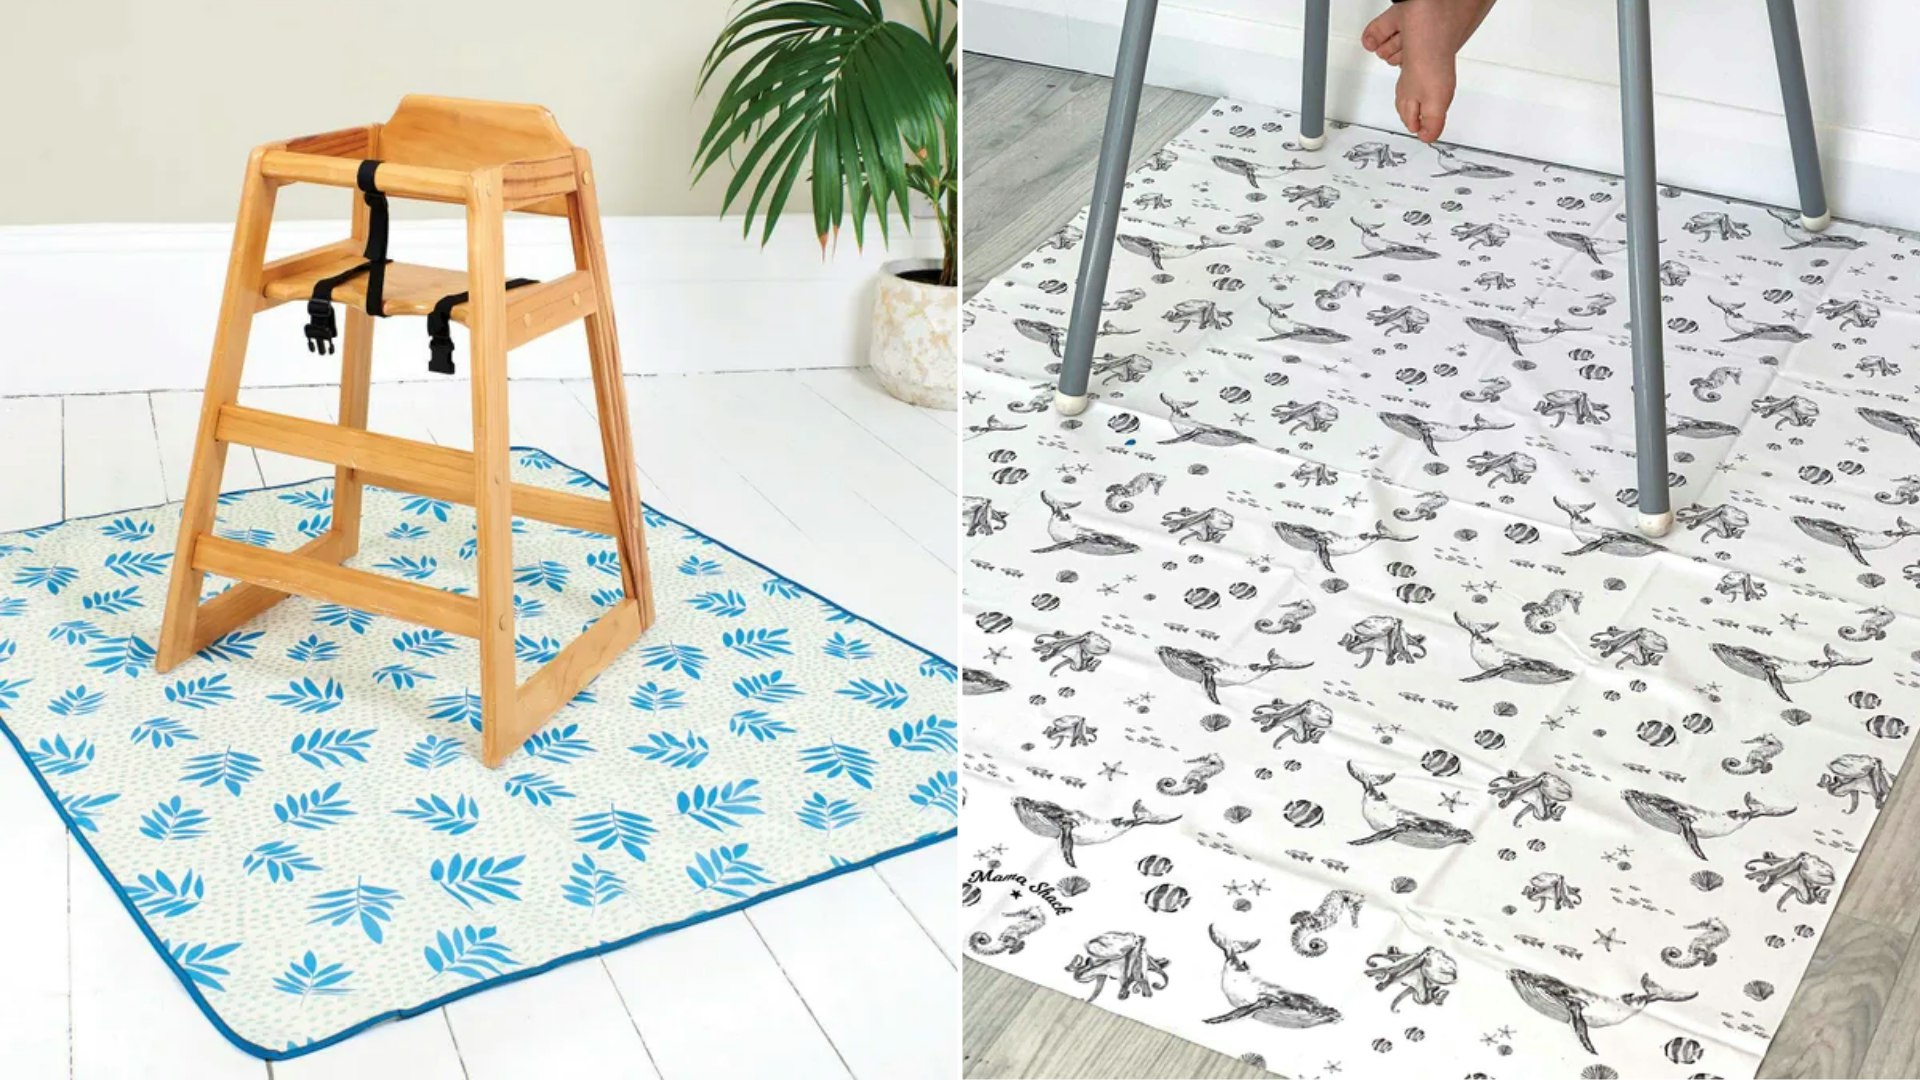 Splat Mat for Under High Chair/Arts/Crafts, WOMUMON Washable Spill